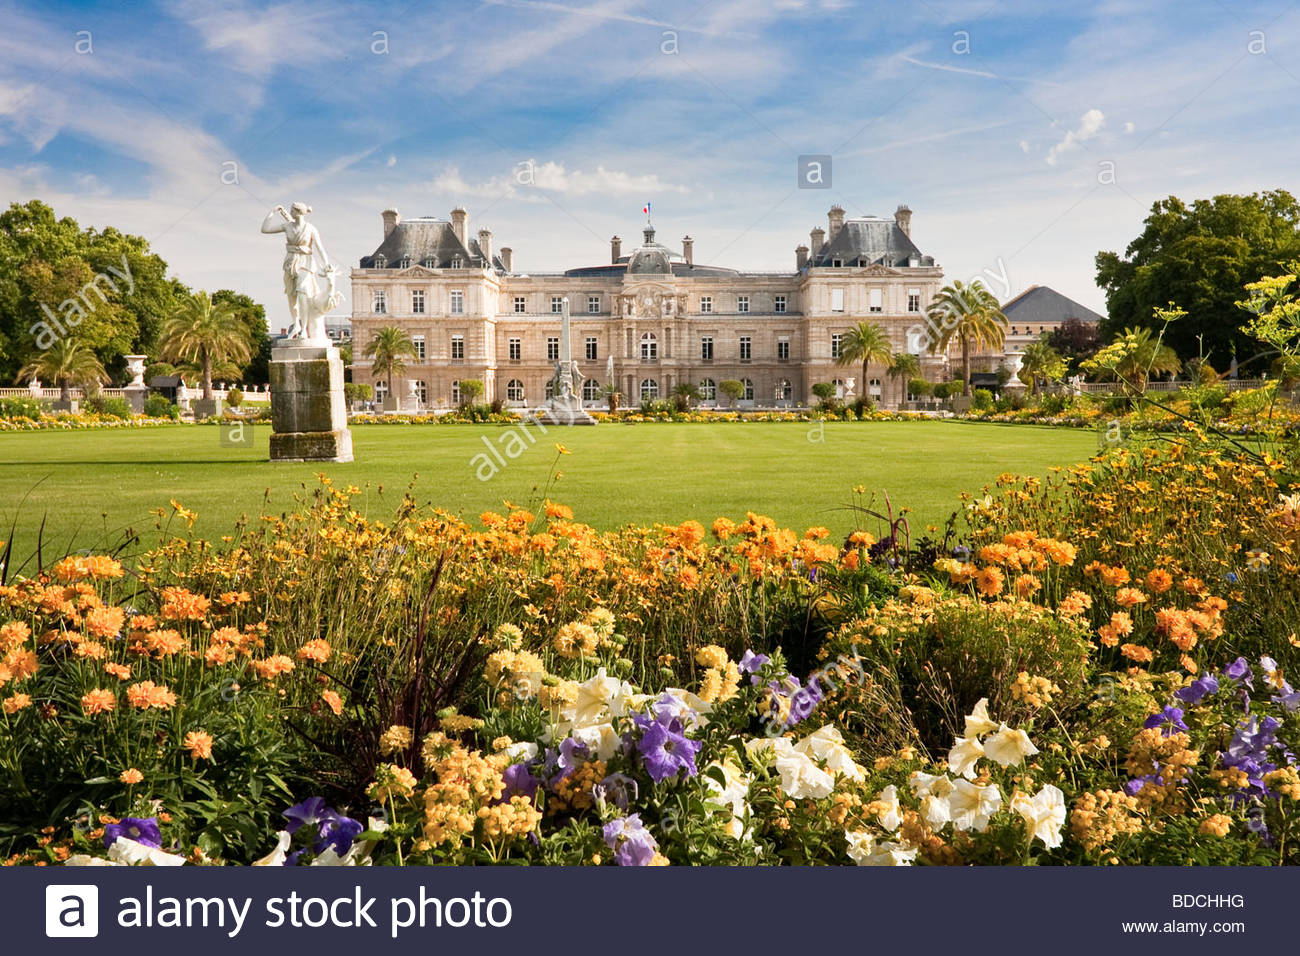 jardin du luxembourg with the palace and statue few flowers are in BDCHHG